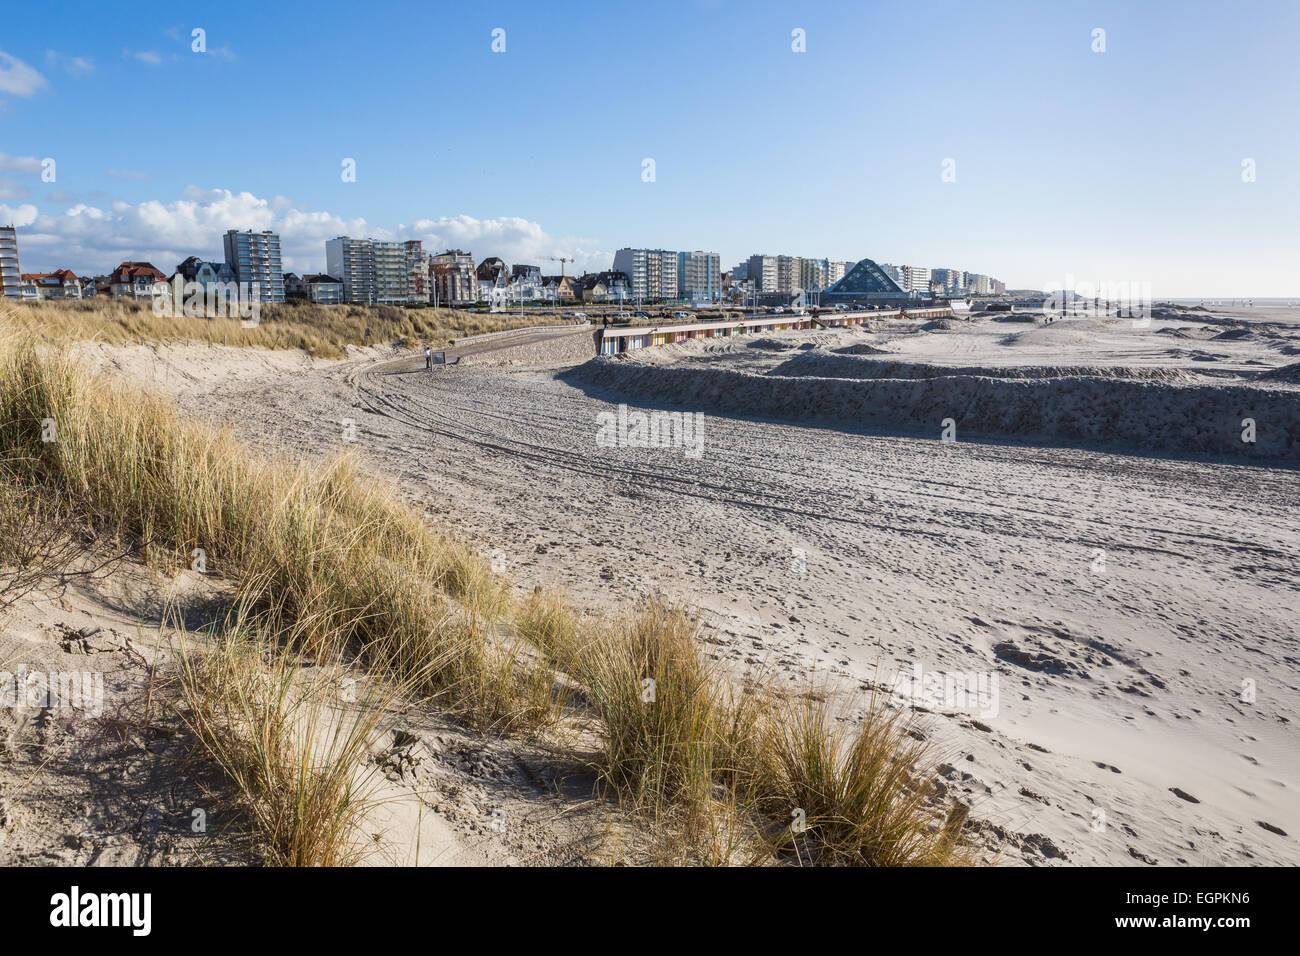 The town of Le Touquet, France from the sand dunes at Paris-Plage Stock Photo